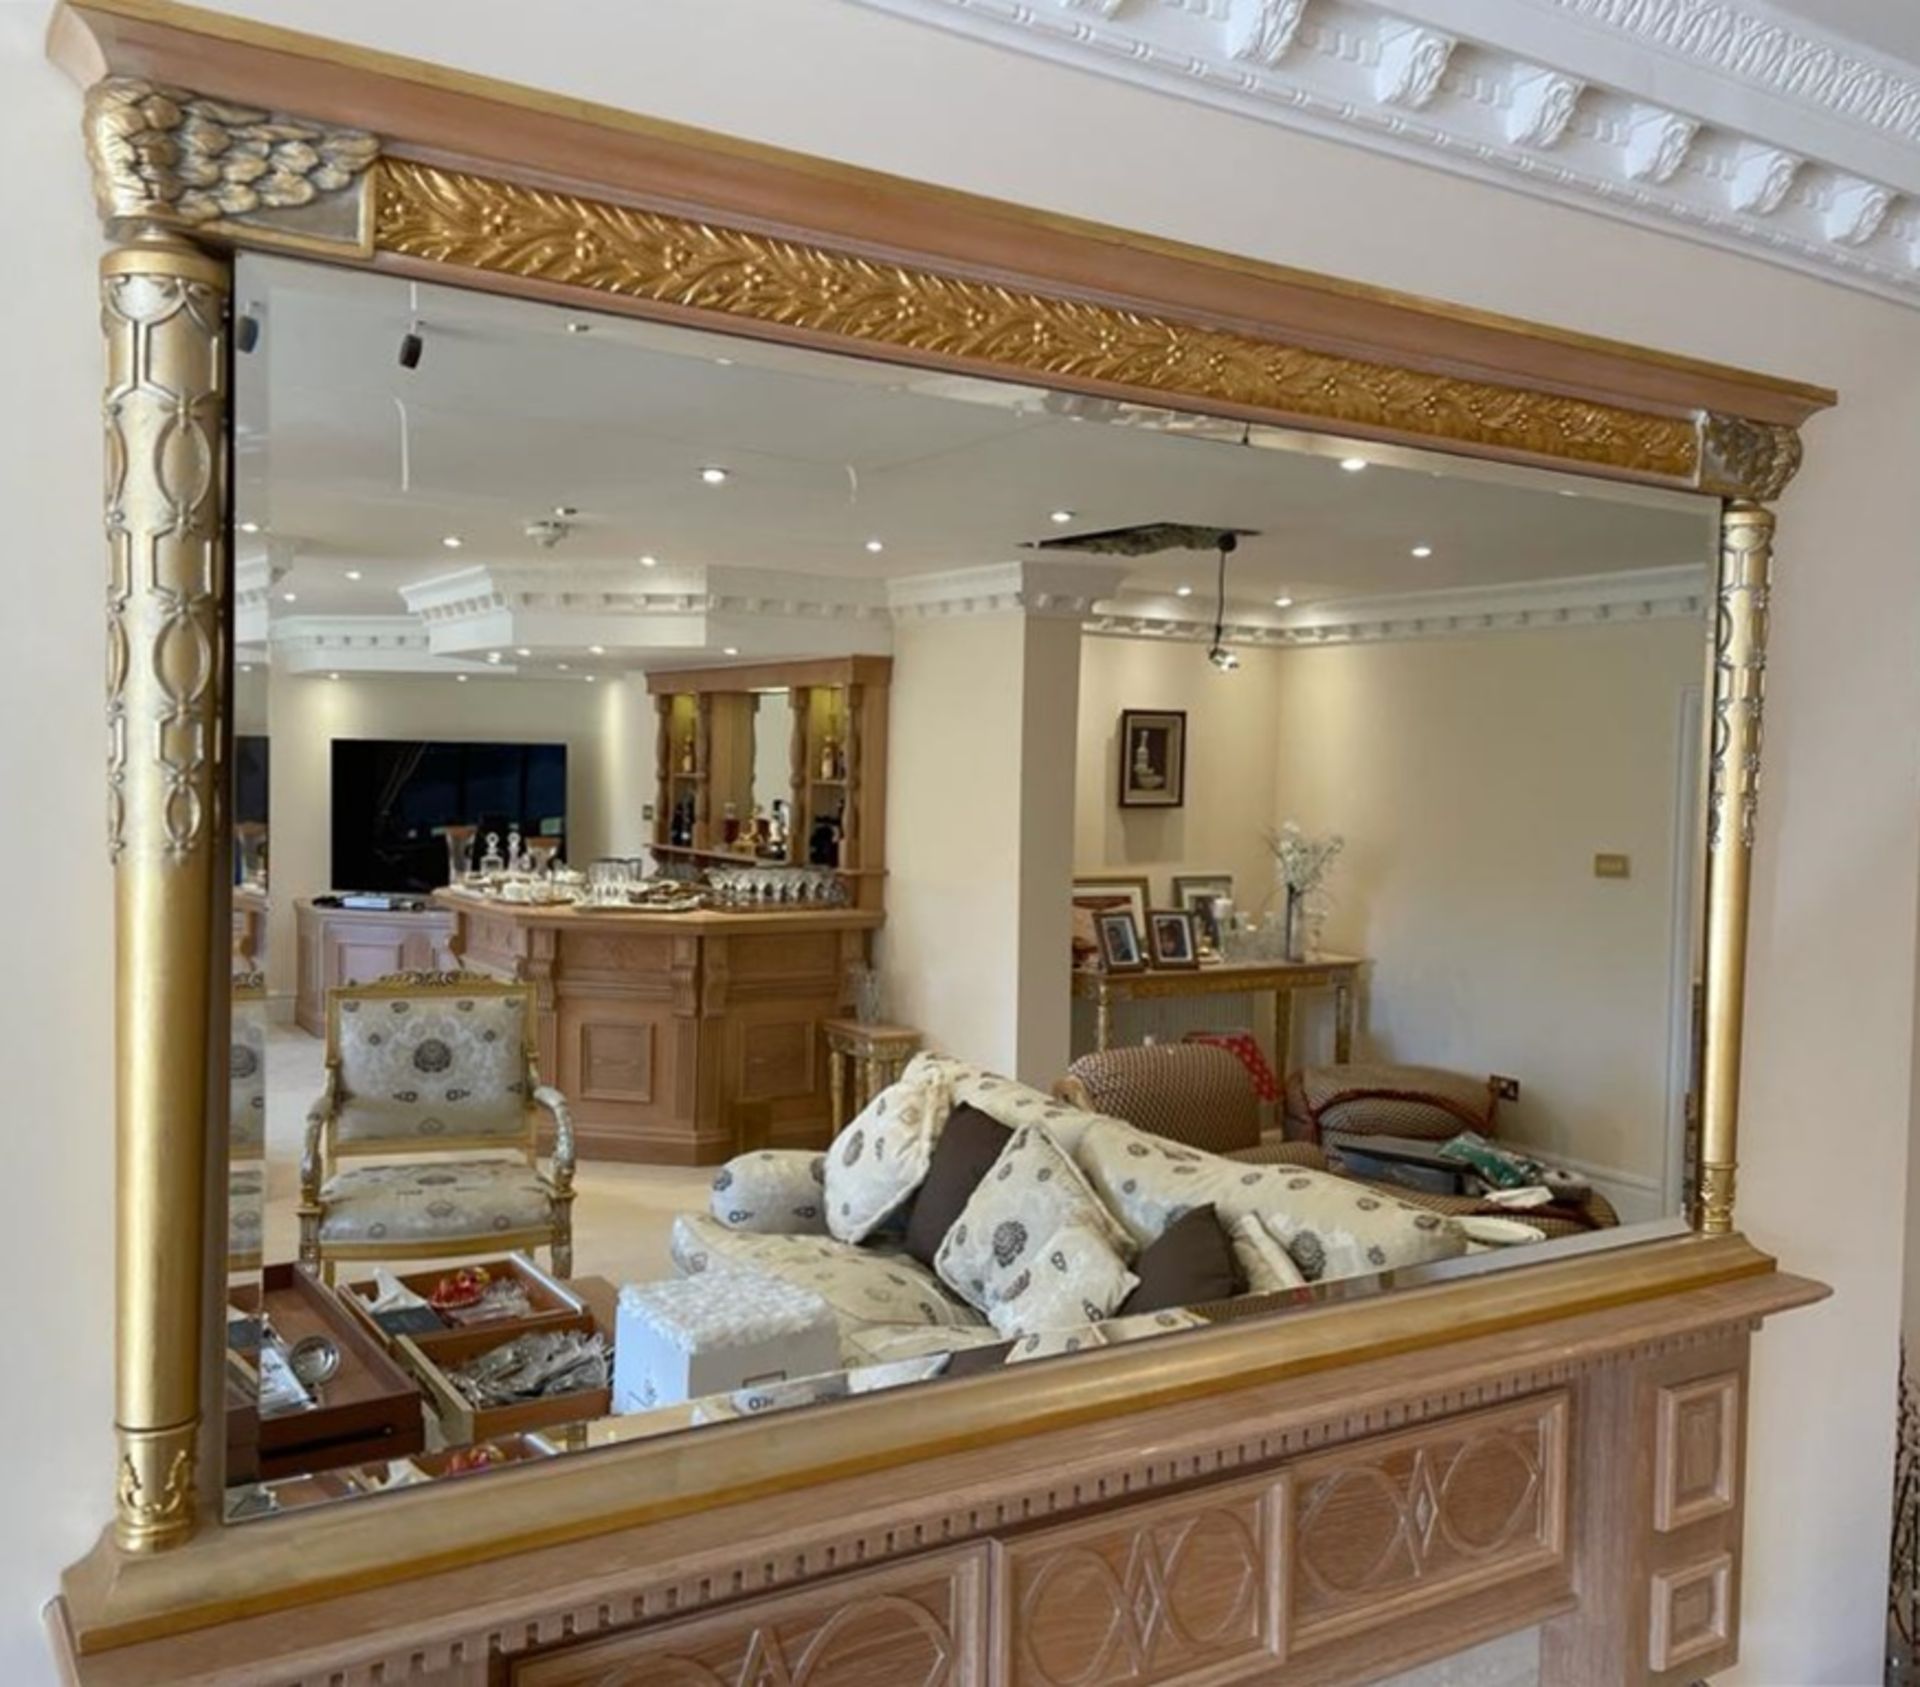 1 x Ornate Overmantel Wall Mirror With Fine Carving Work and Moulded Cornice - Features a Bevelled